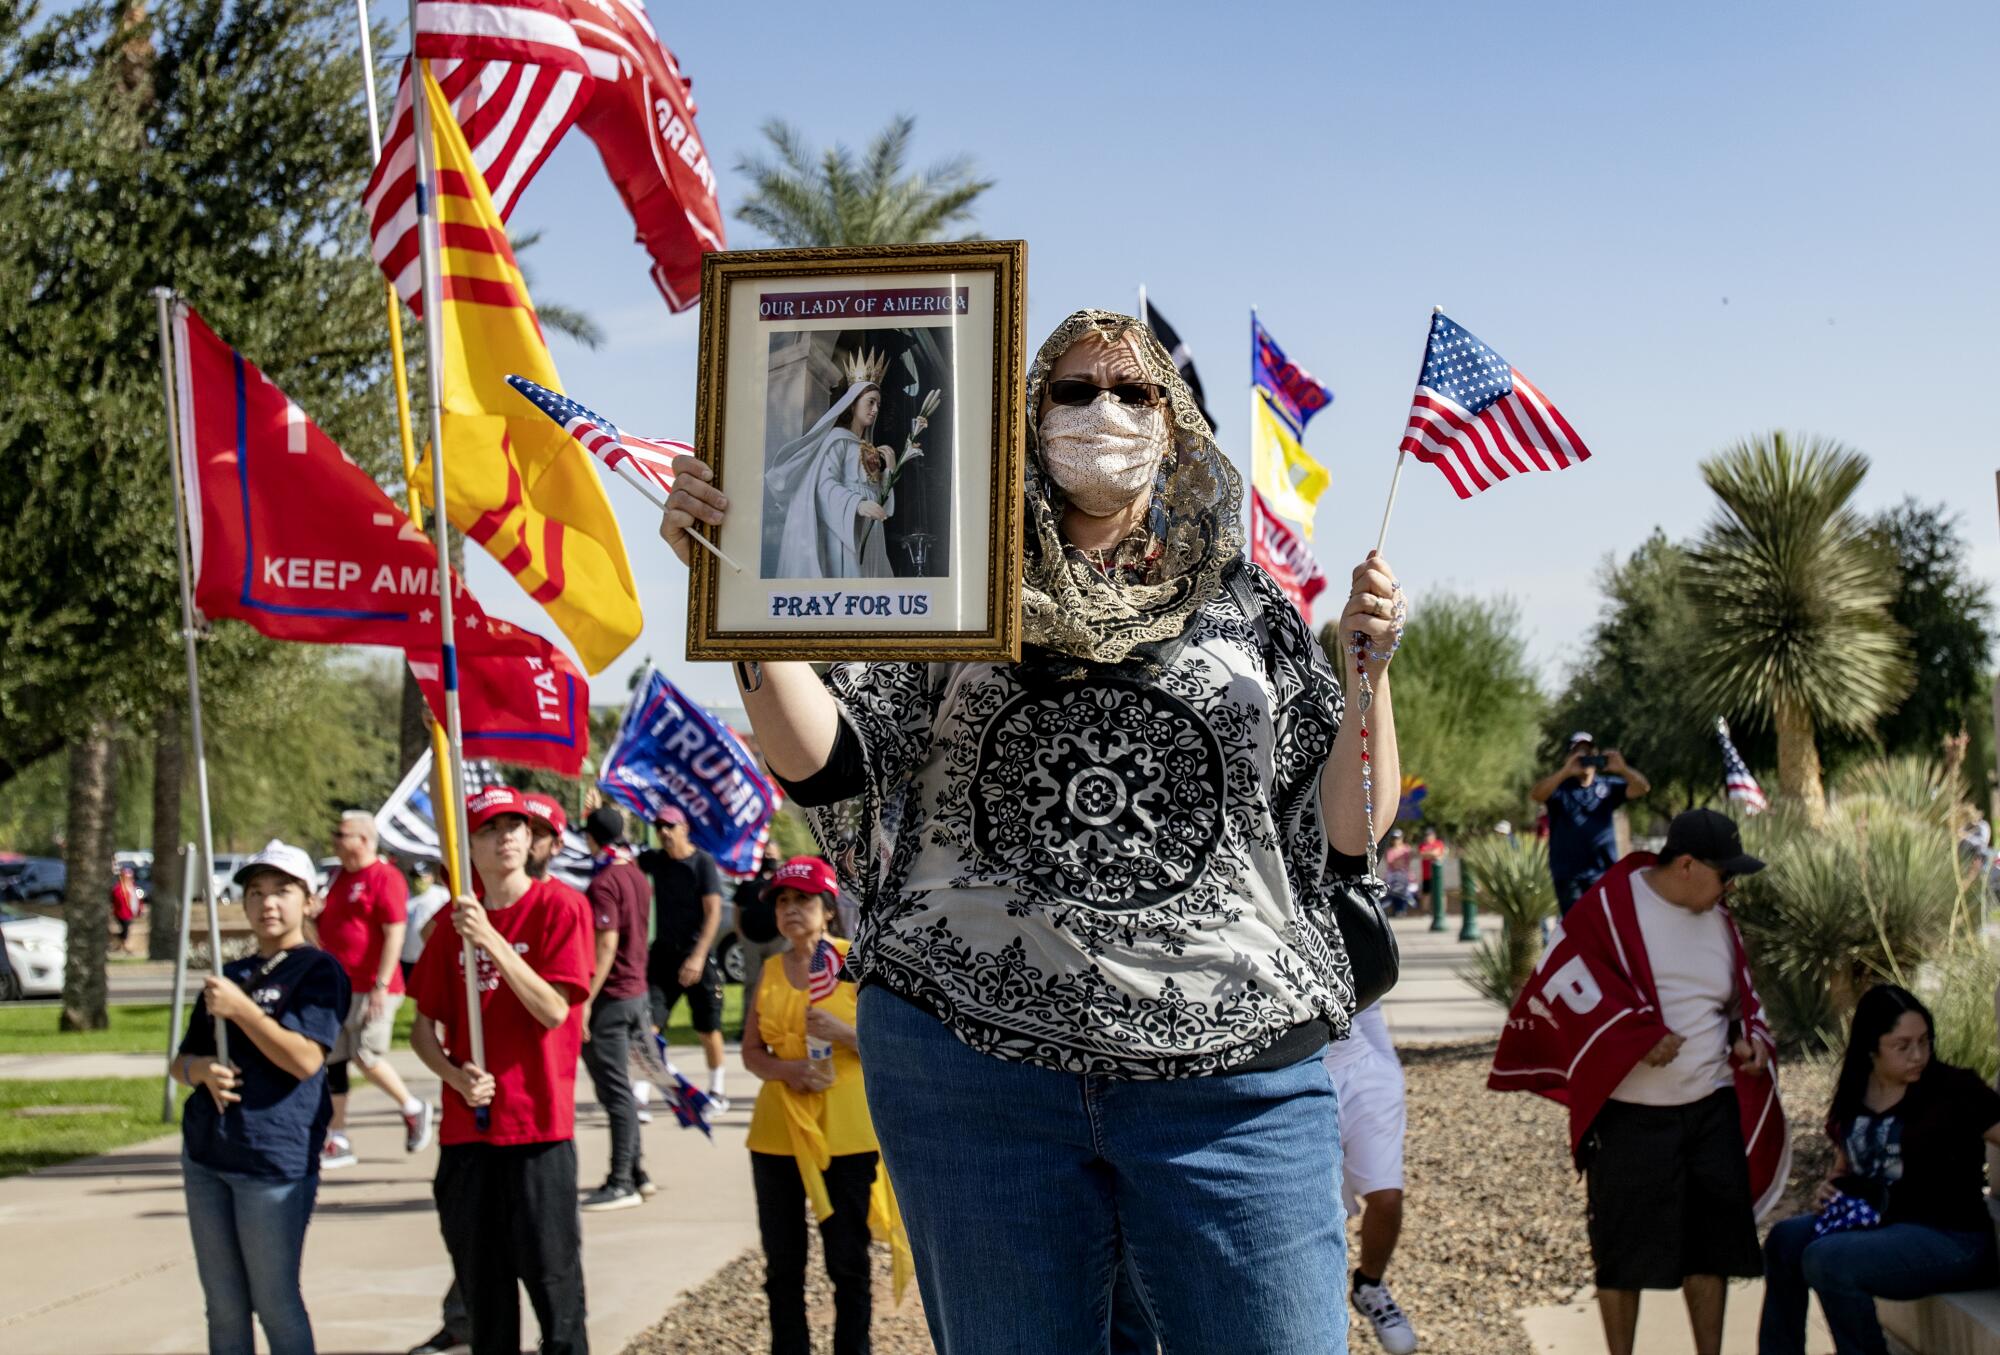 Trump supporter Elizabeth Lund holds her rosary and a religious photo at a "Stop The Steal" rally in Phoenix.